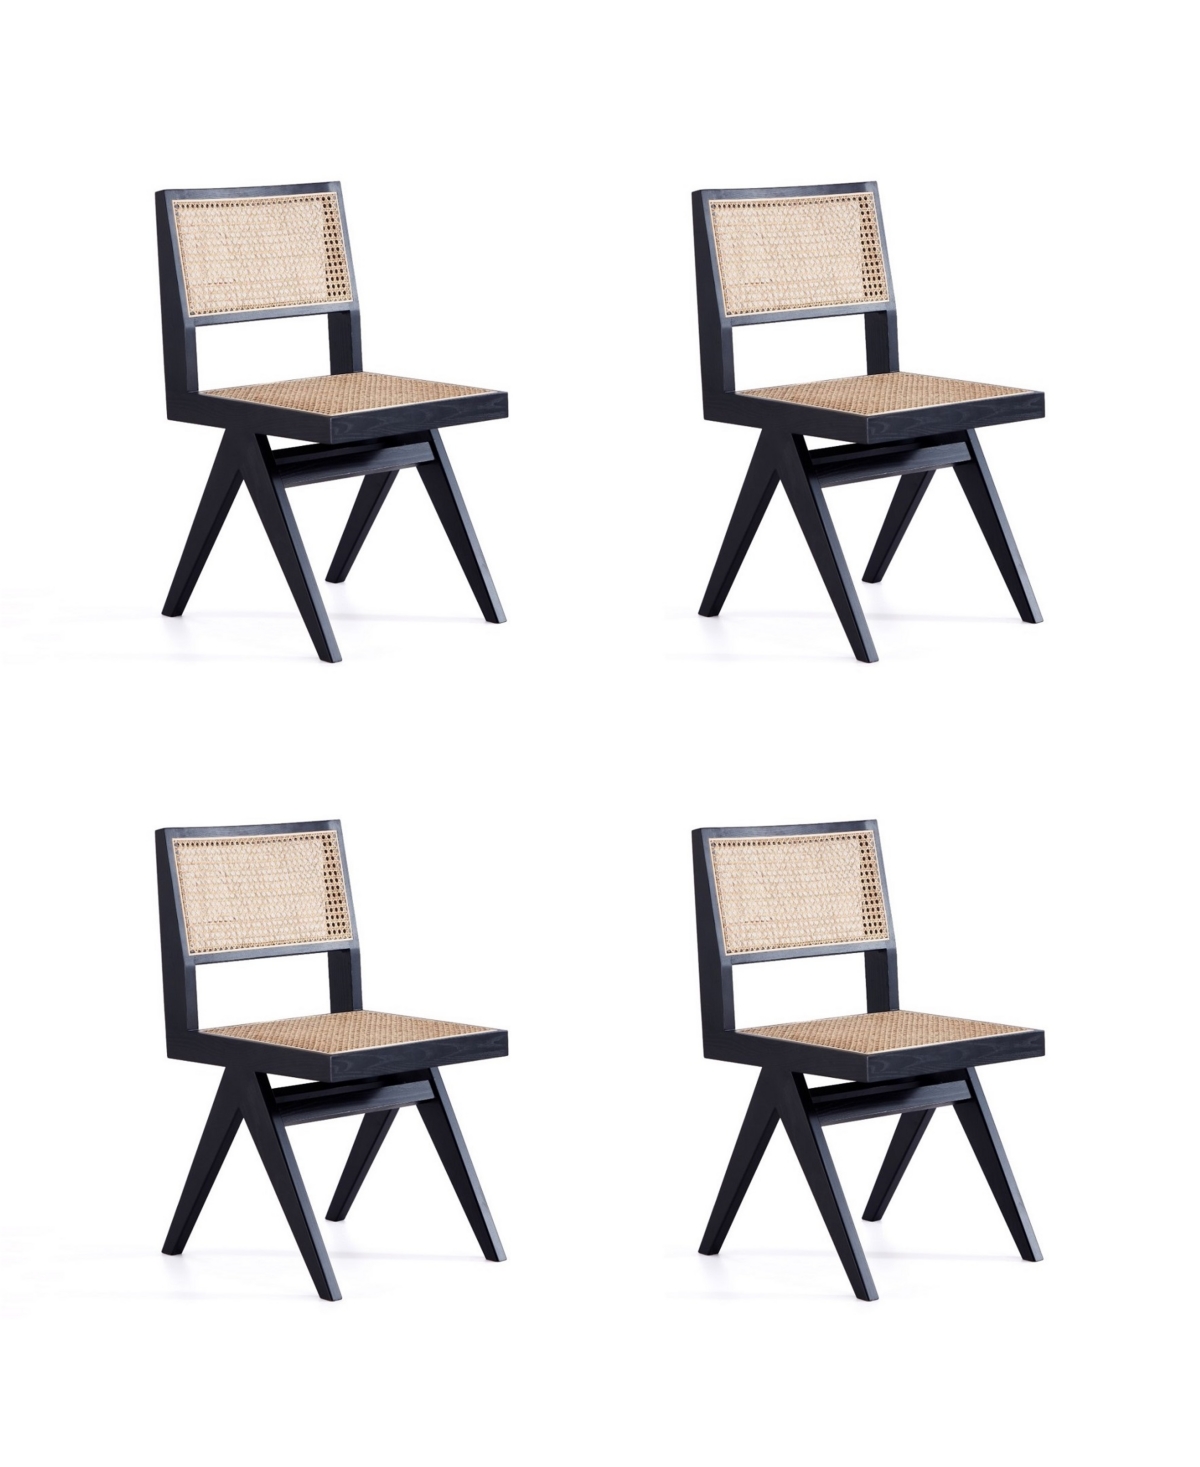 Manhattan Comfort Hamlet 4-piece Ash Wood And Natural Cane Rectangular Seat Dining Chair In Black And Natural Cane